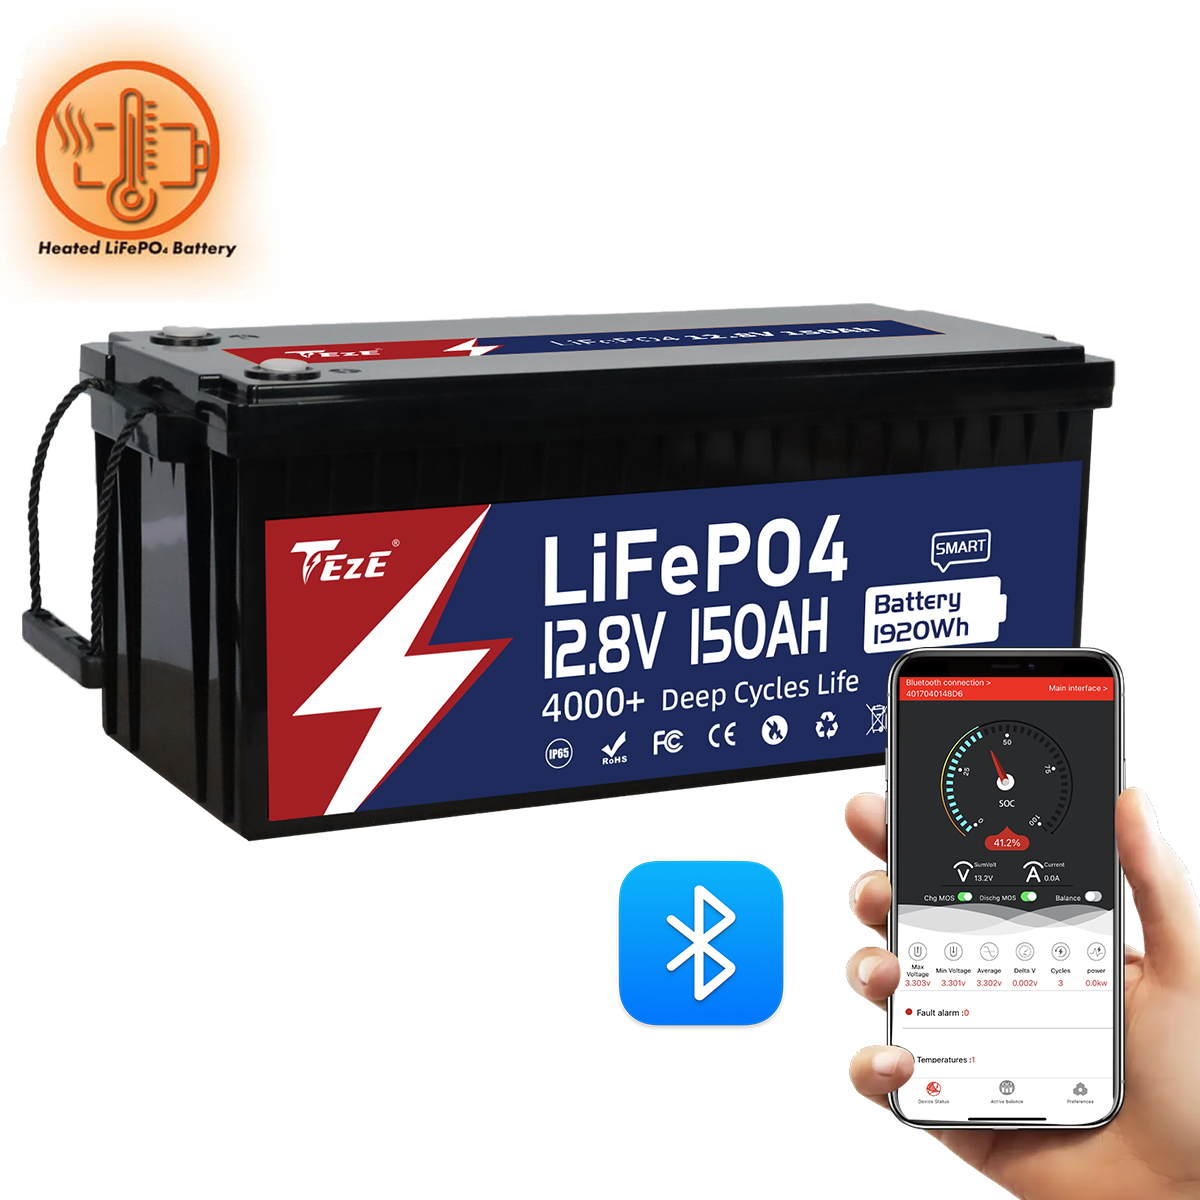 TezePower 12V 150Ah LiFePO4 Battery with Bluetooth, Self-heating and Active Balancer, Built-in 150A Daly BMS(Bluetooth Built-in Version)-TezePower